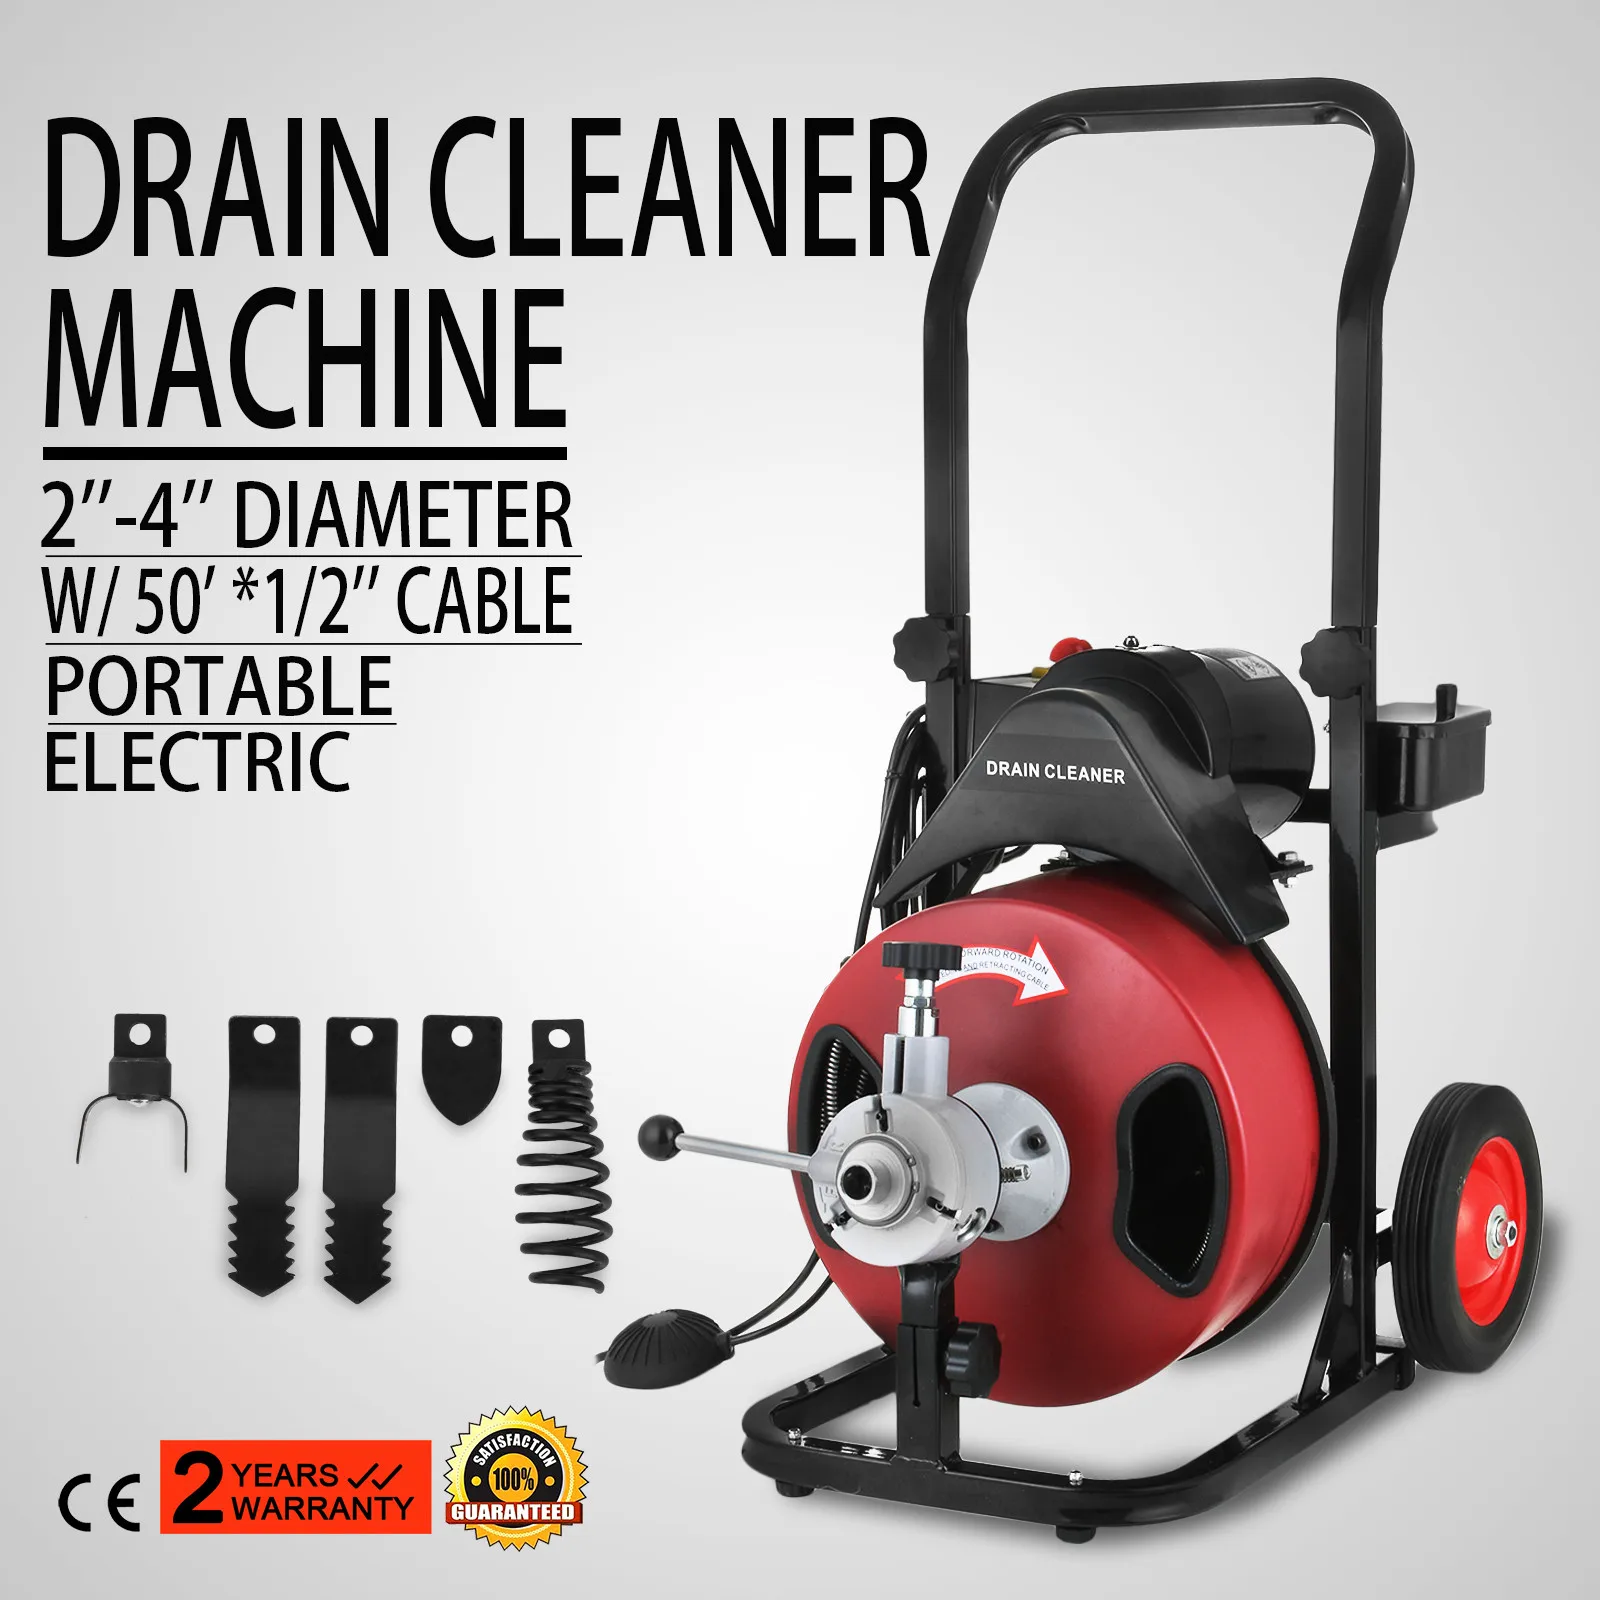 Showers & Floor Drains 250W Electric Pipe Drain Auger Cleaning Machine w/4 Cutters For 2” to 4” Pipes For Sinks 1/2 50FT Sewer Snake Drill Drain Auger Cleaner 